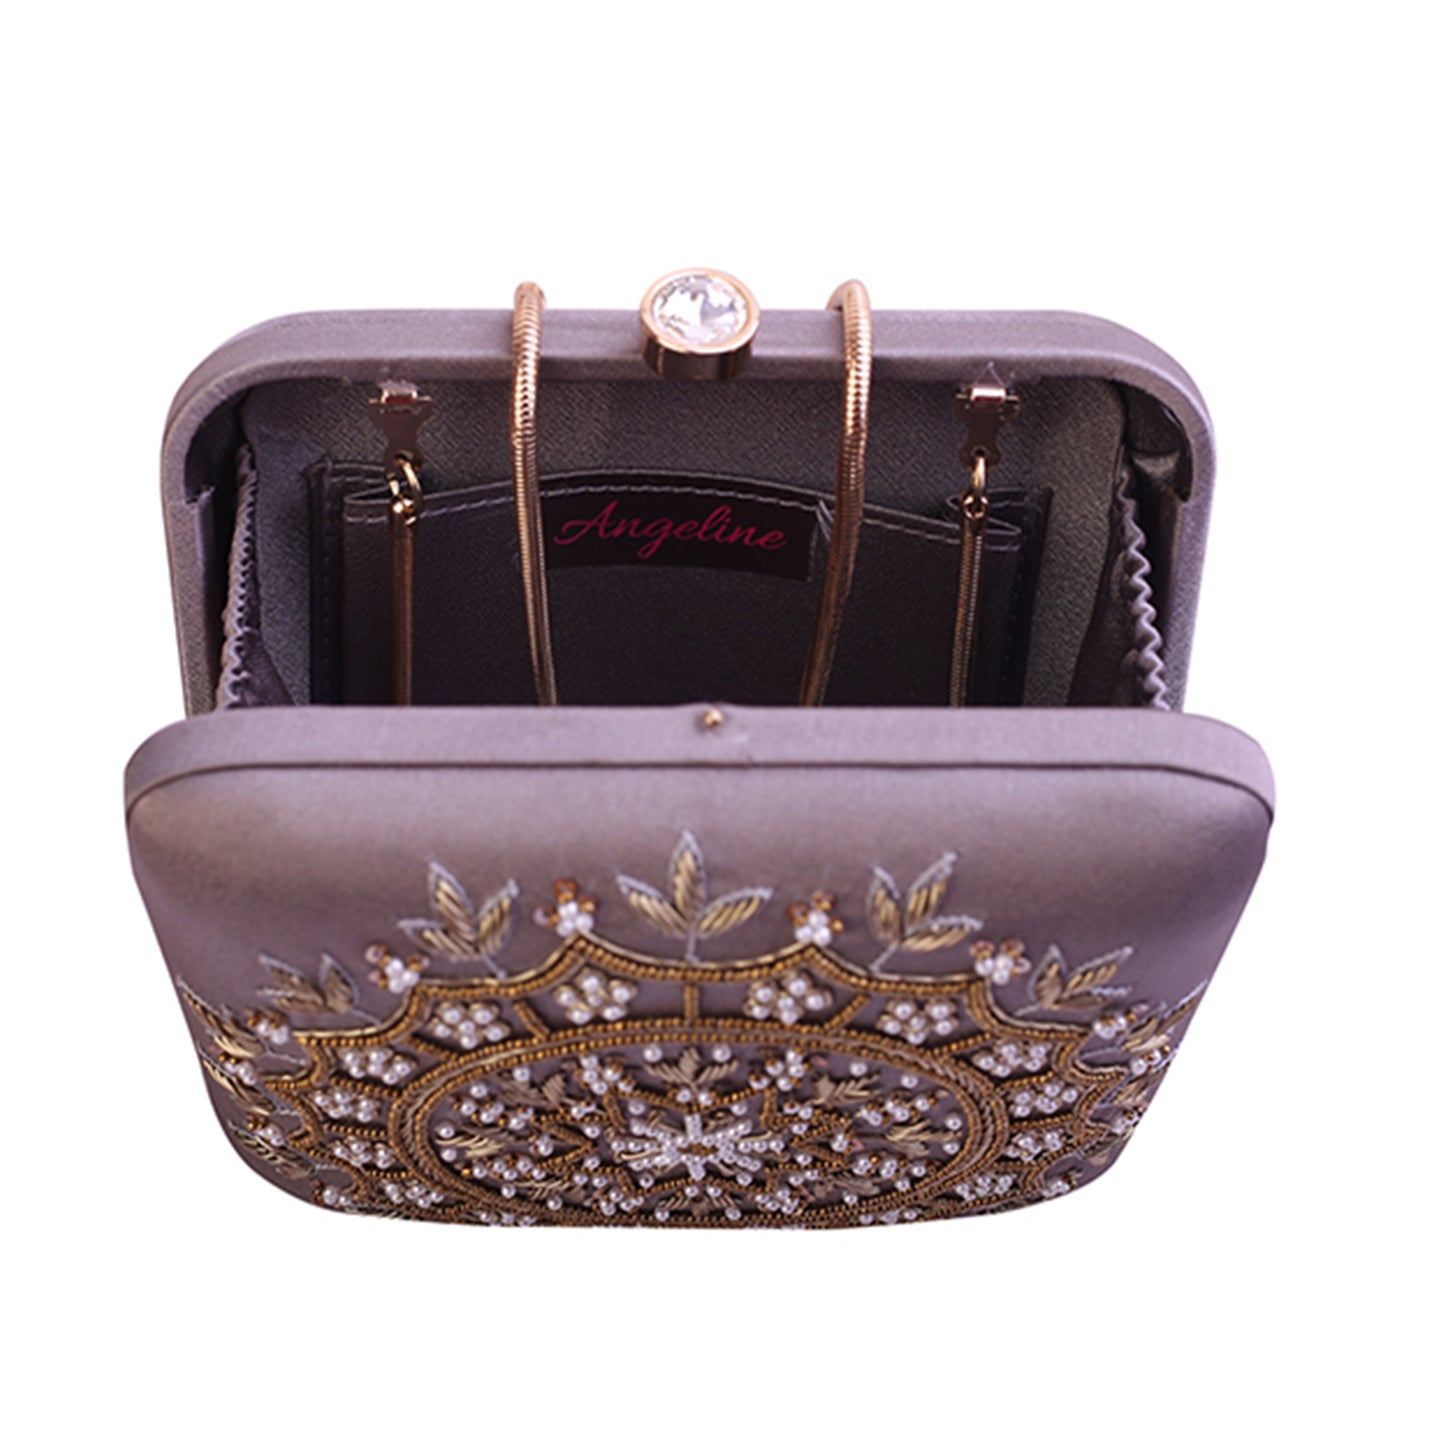 Angeline's Clutch Bag with Vintage Embroidery work